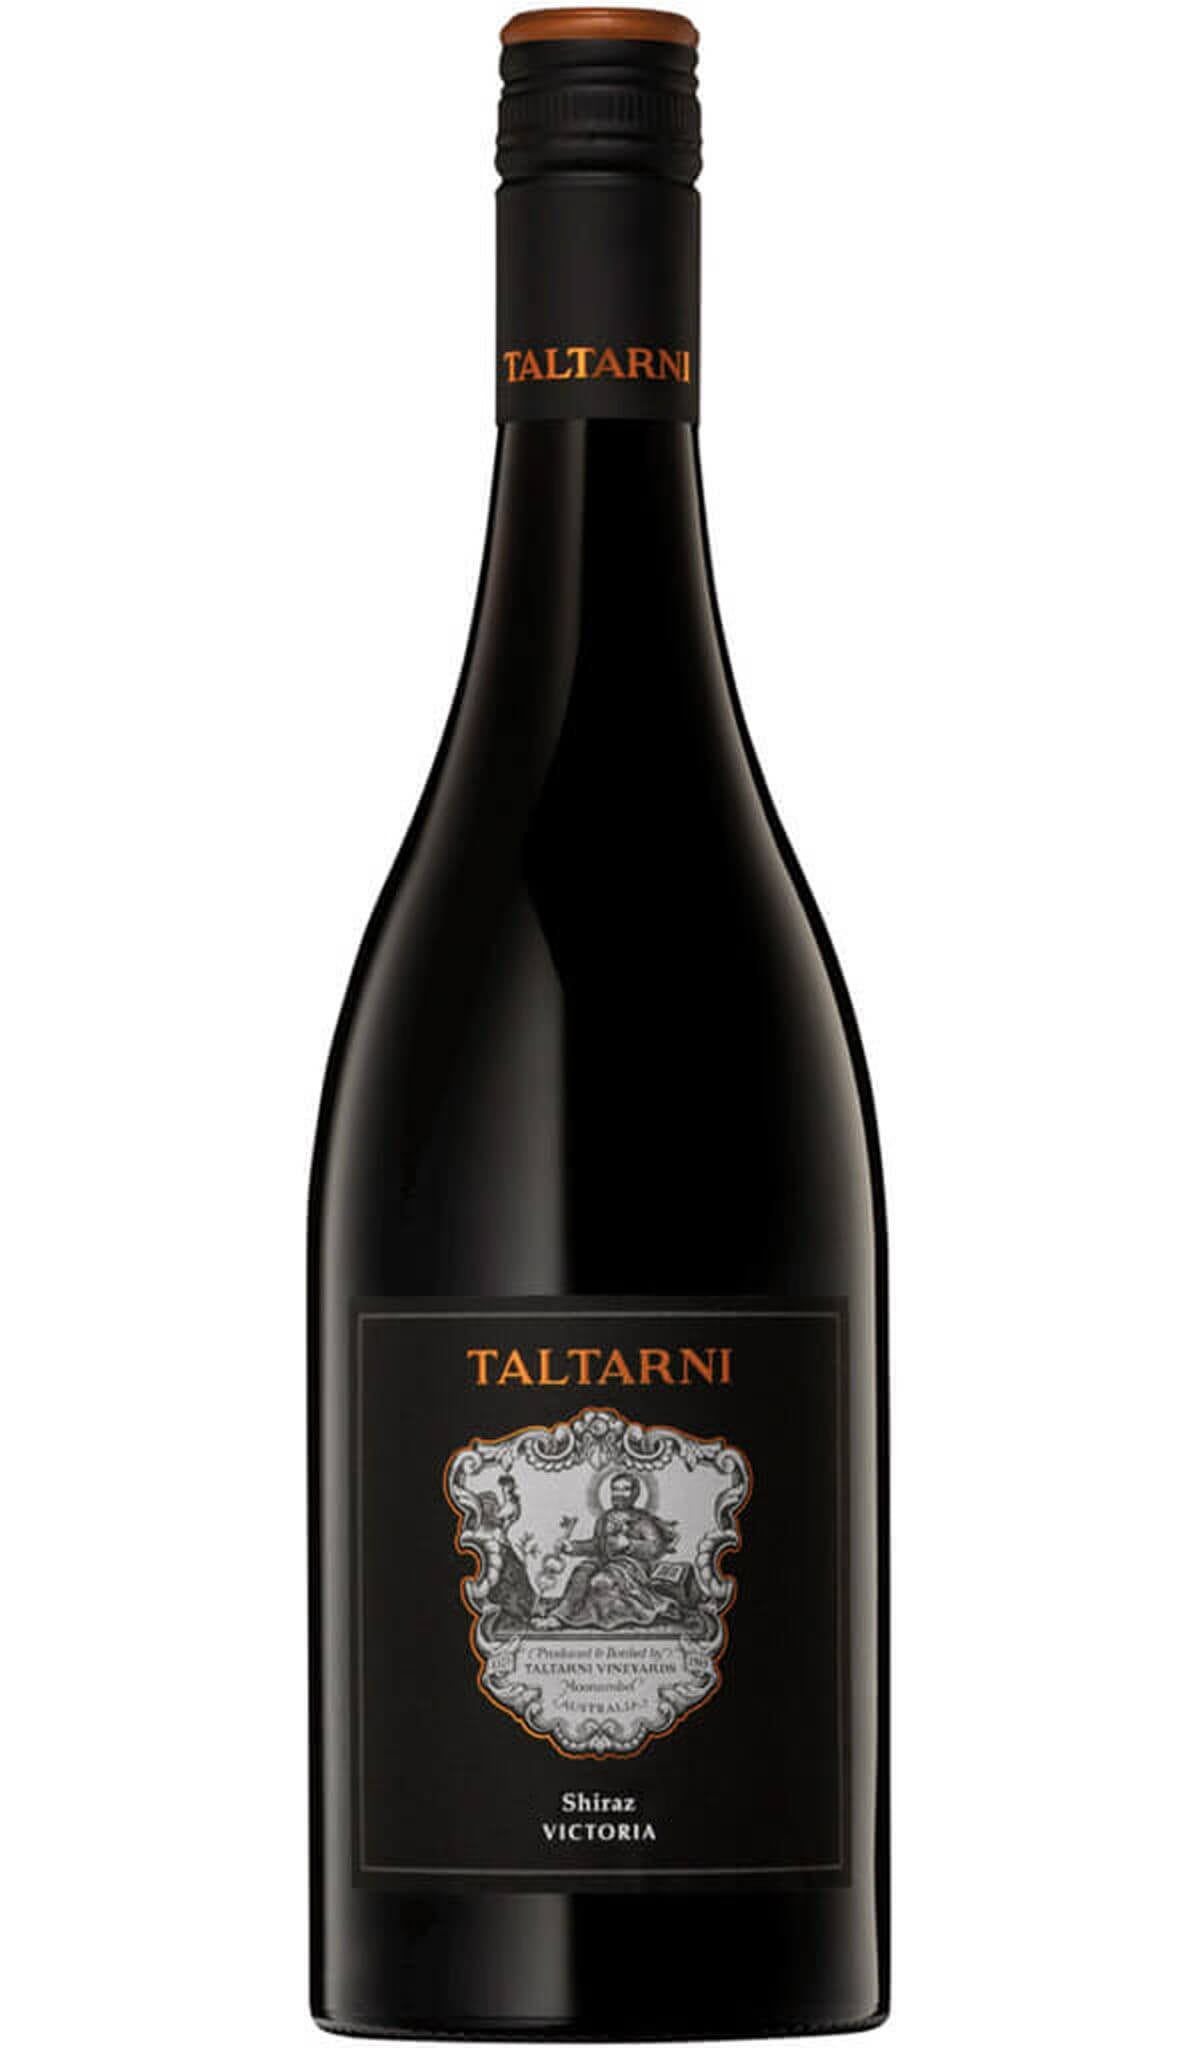 Find out more or purchase Taltarni Dynamic Shiraz 2020 online at Wine Sellers Direct - Australia's independent liquor specialists.